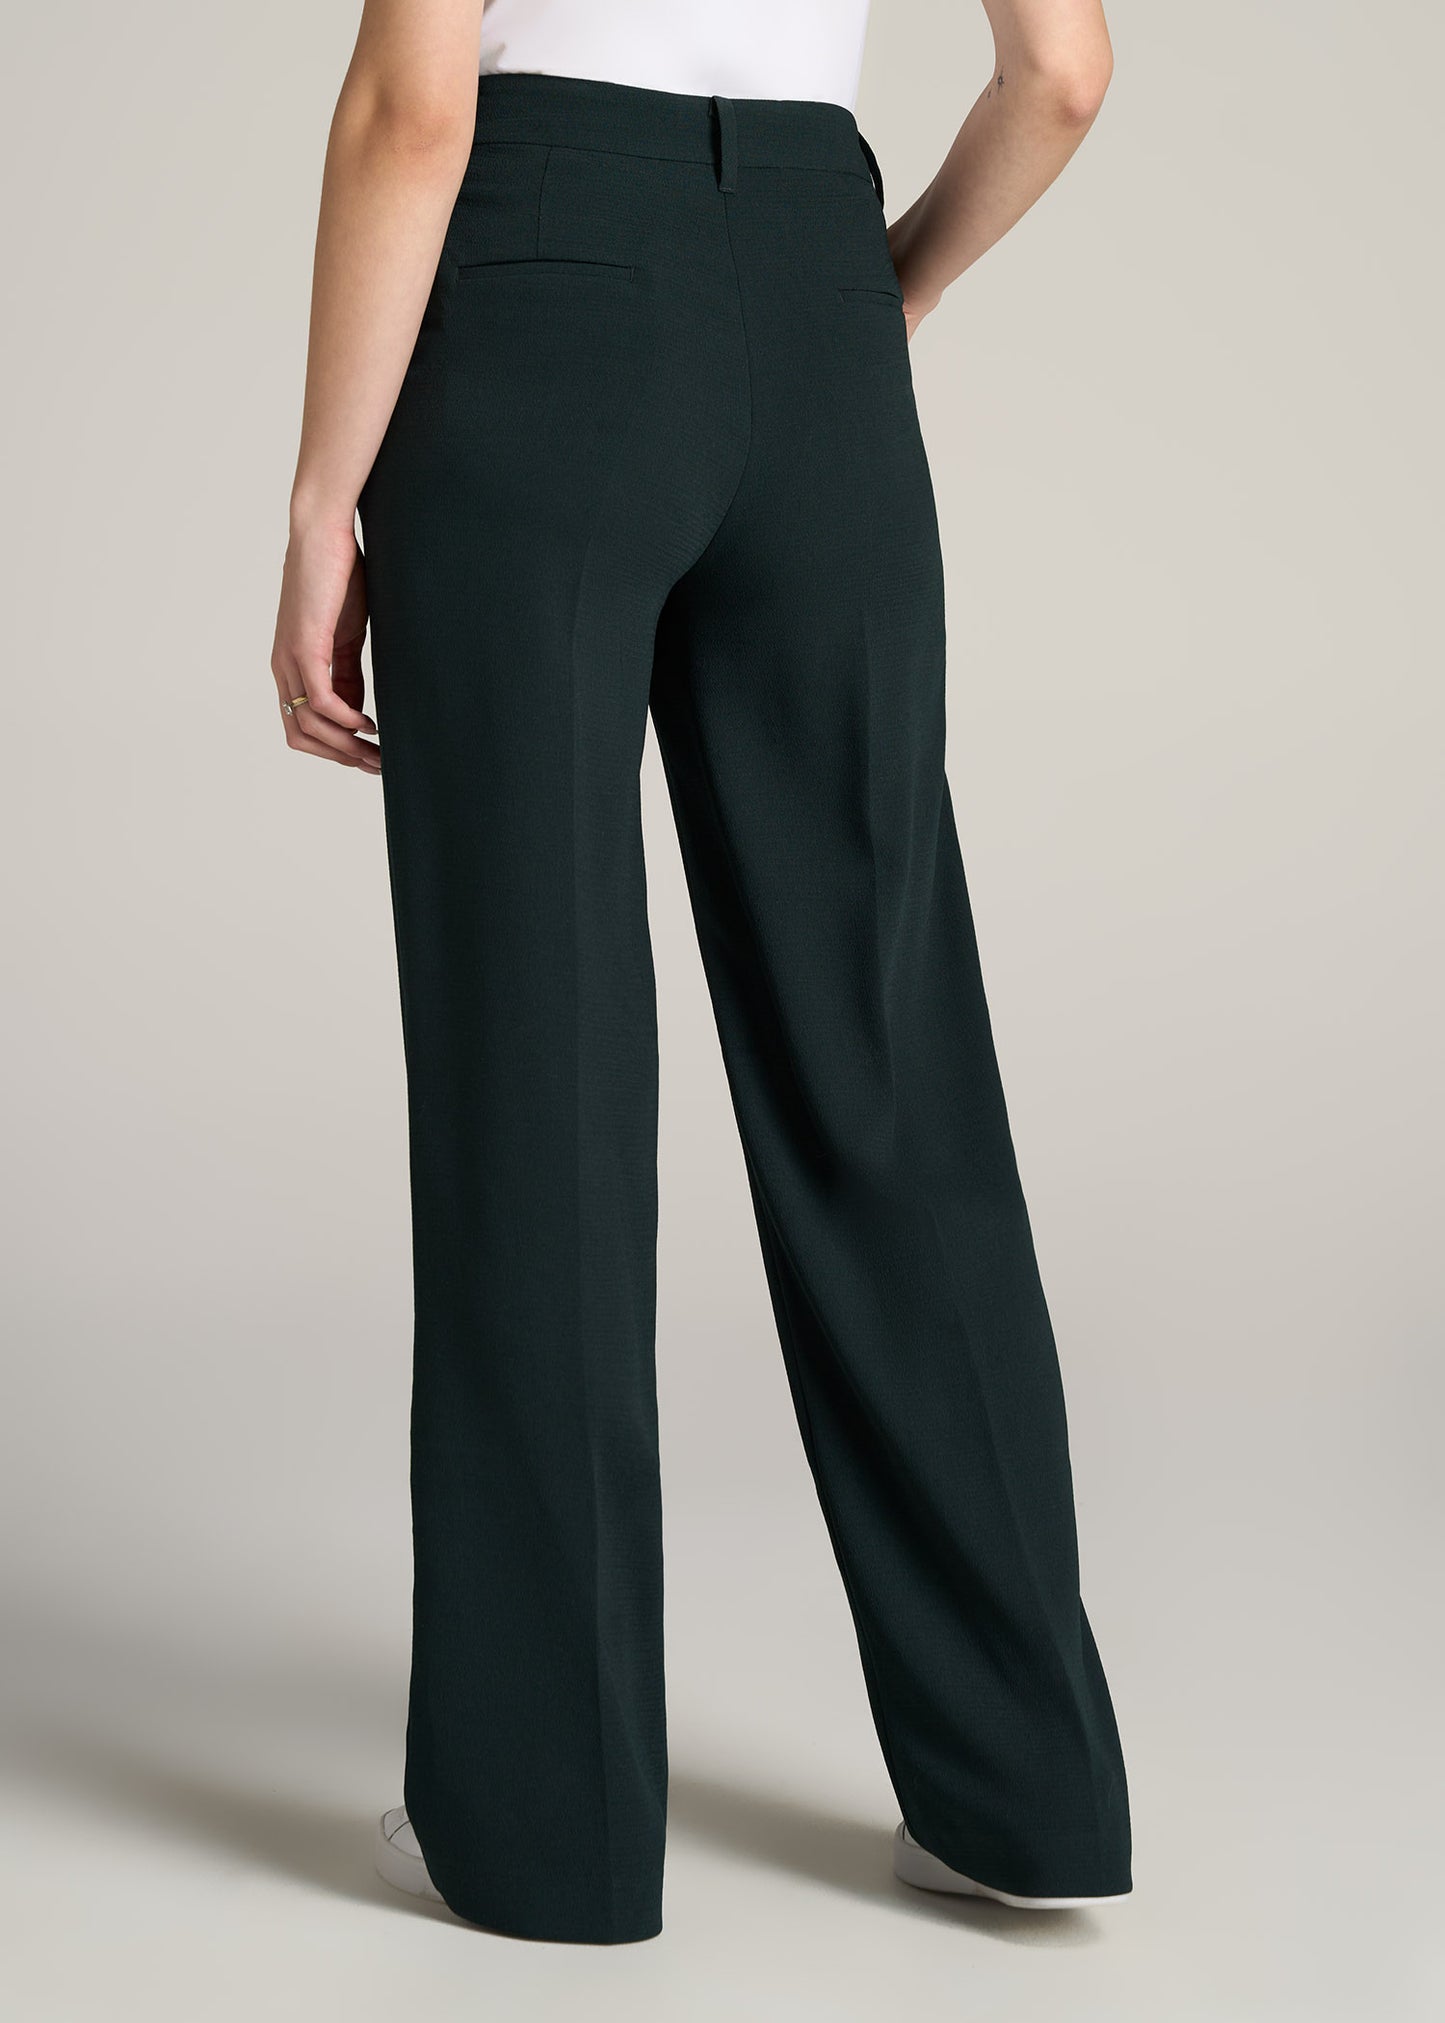 Buy Premium Overlap Band Pleated Trouser Online | SizeYOU by Jaey